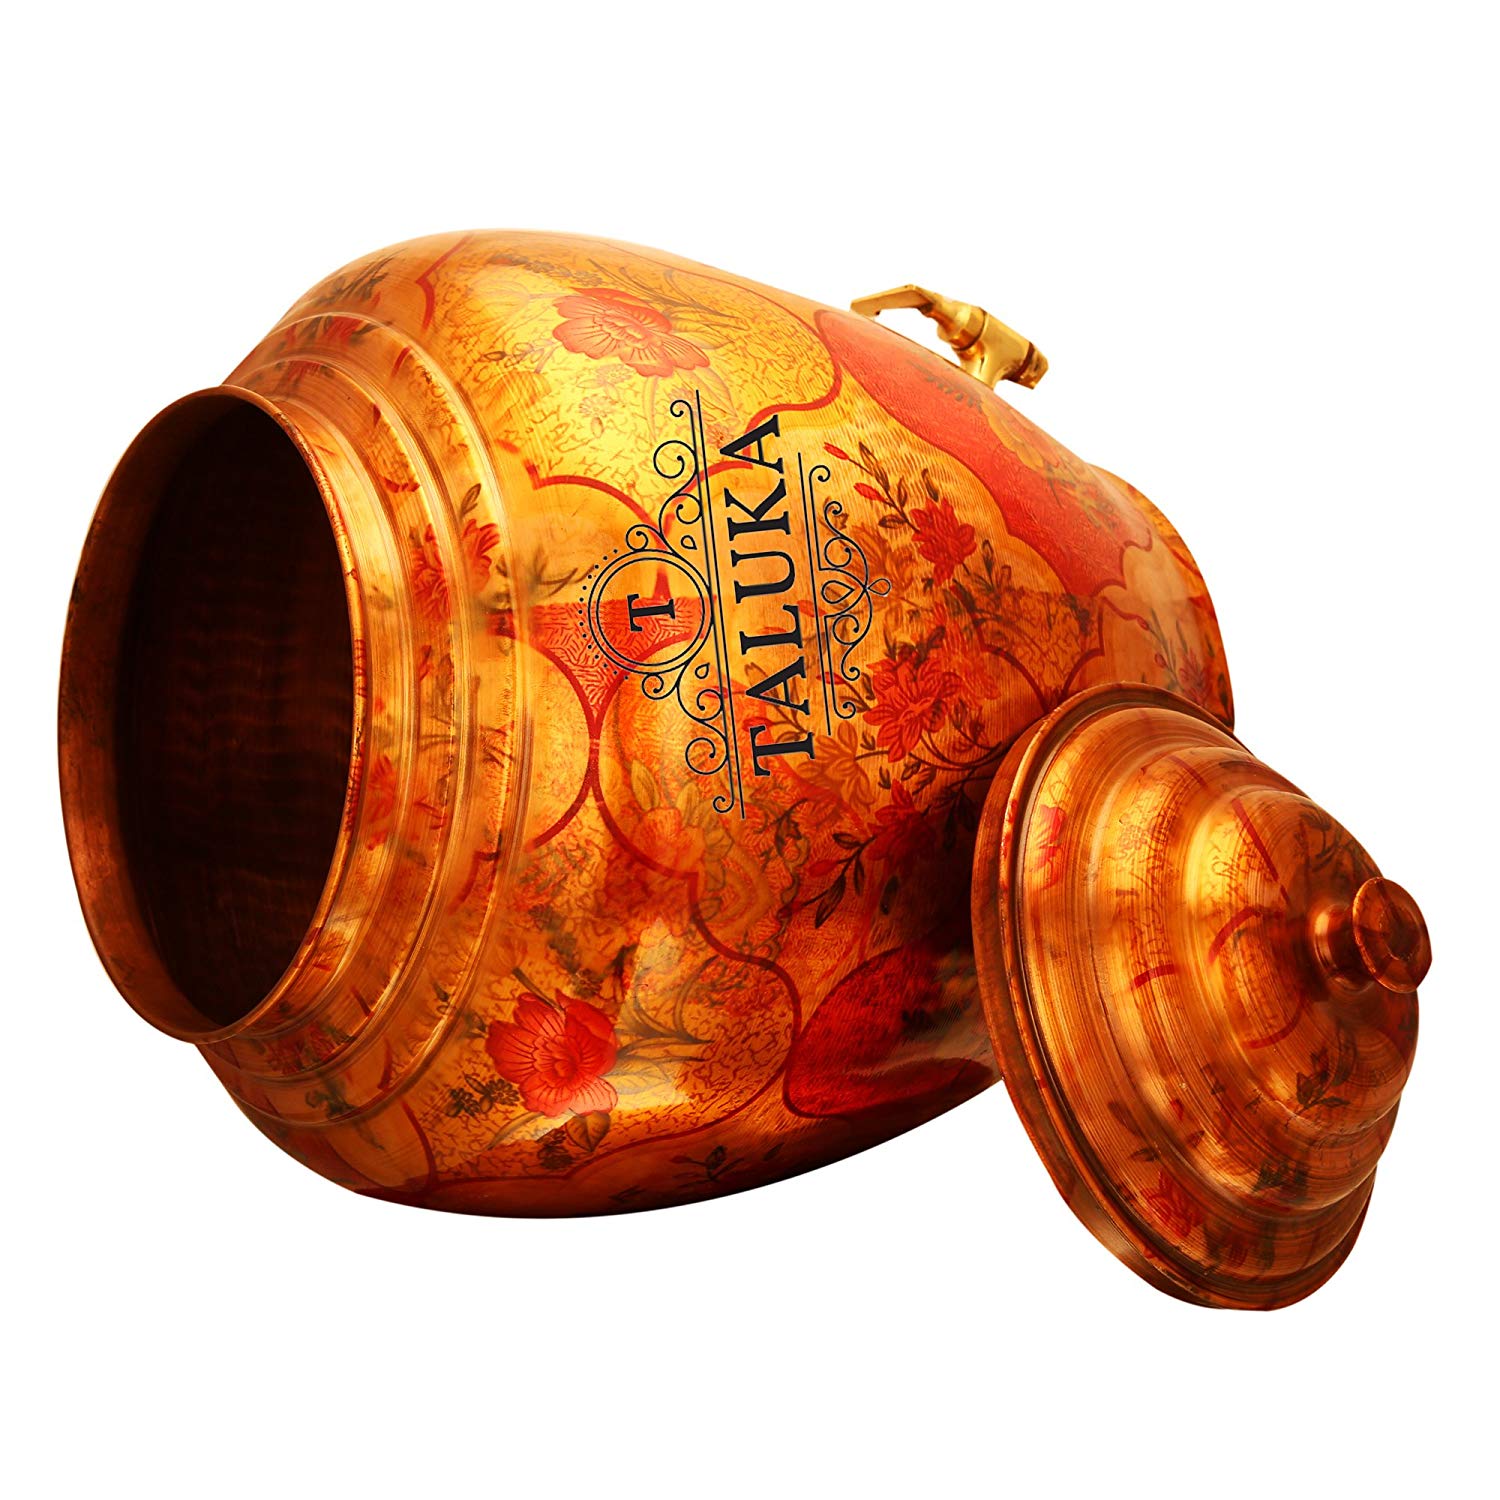 Copper Belly Design Water Pot 16 Liter With 1 PC Copper  Water Bottle Joint Free Leak Proof 800 ML for use Storage Water